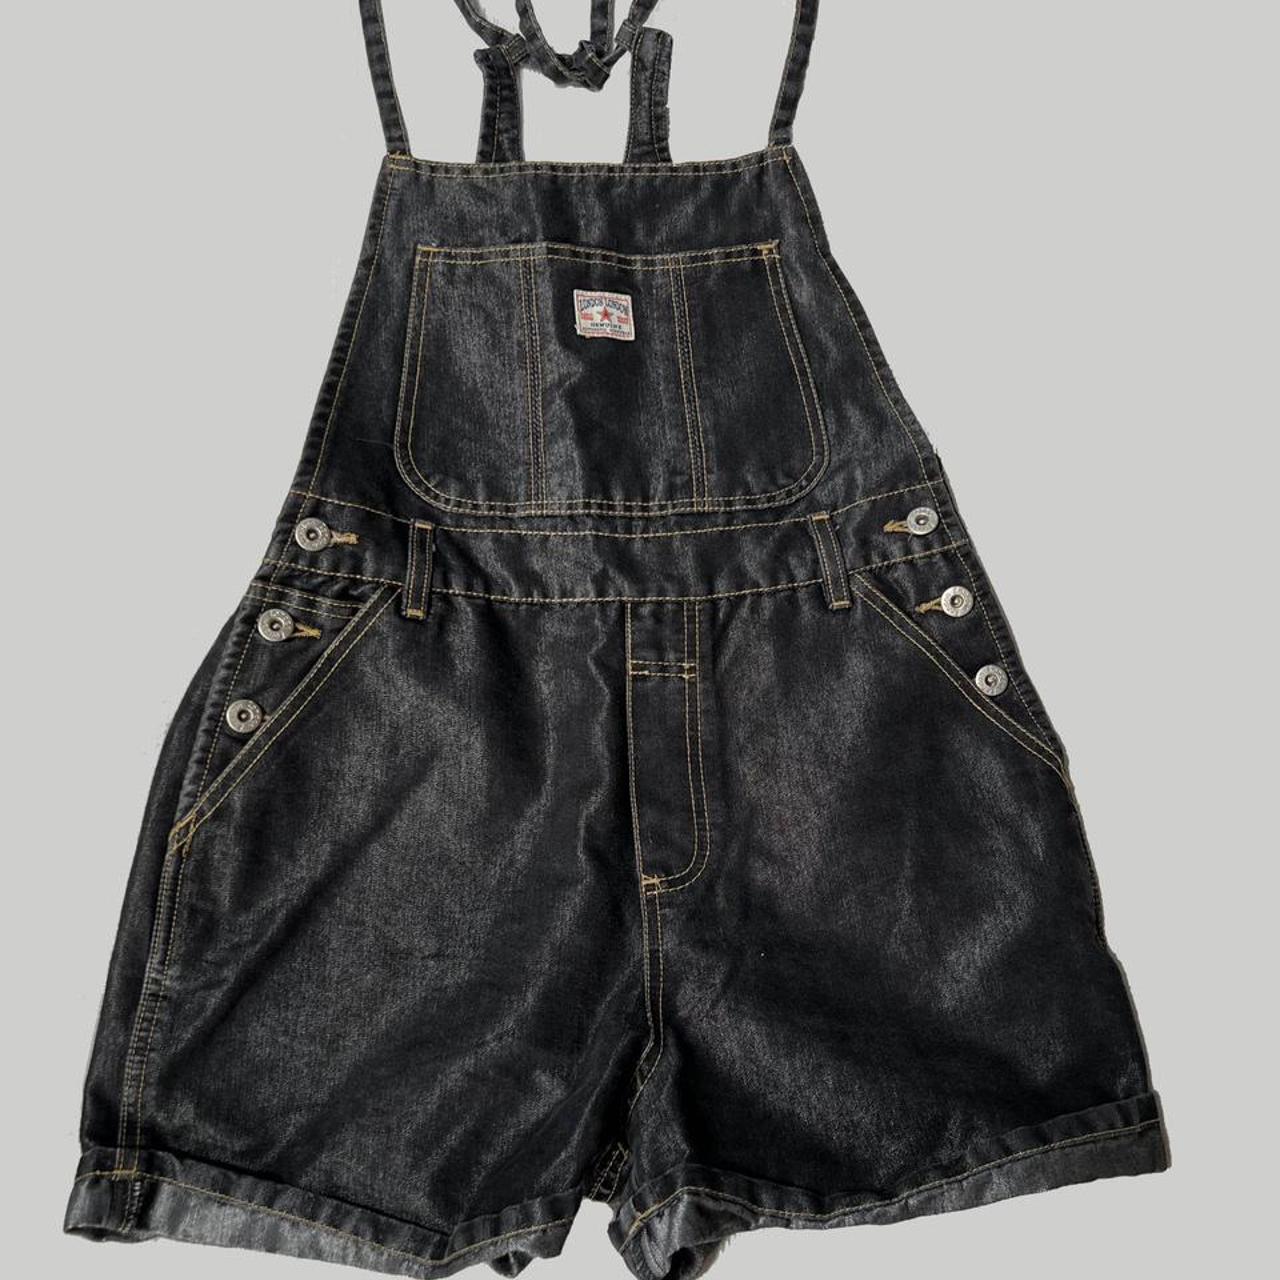 London Fog Women's Black and Silver Dungarees-overalls